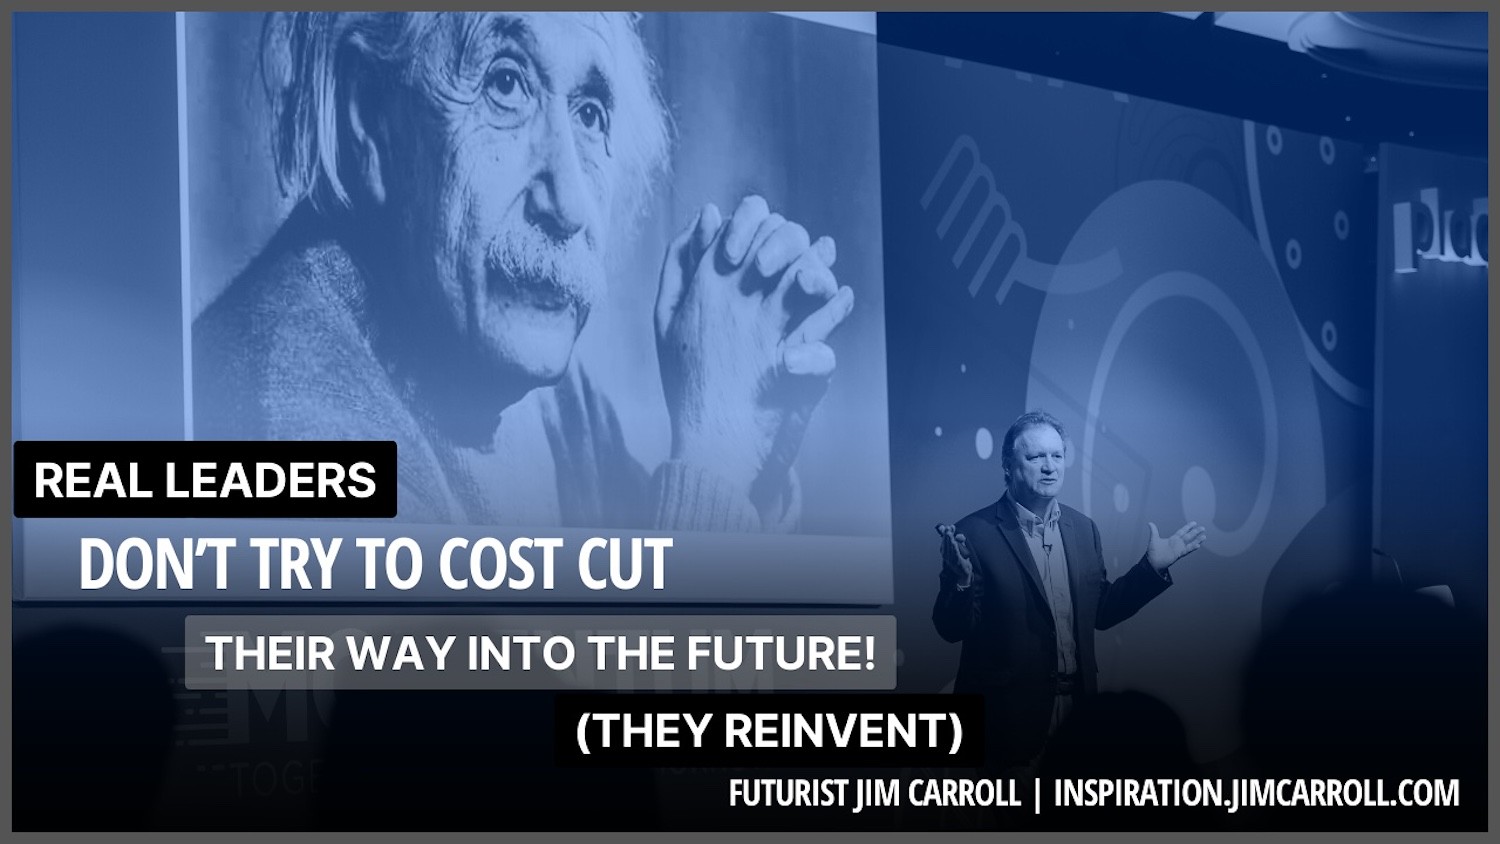 "Real leaders don't try to cost cut their way into the future! (They reinvent!)"  - Futurist Jim Carroll